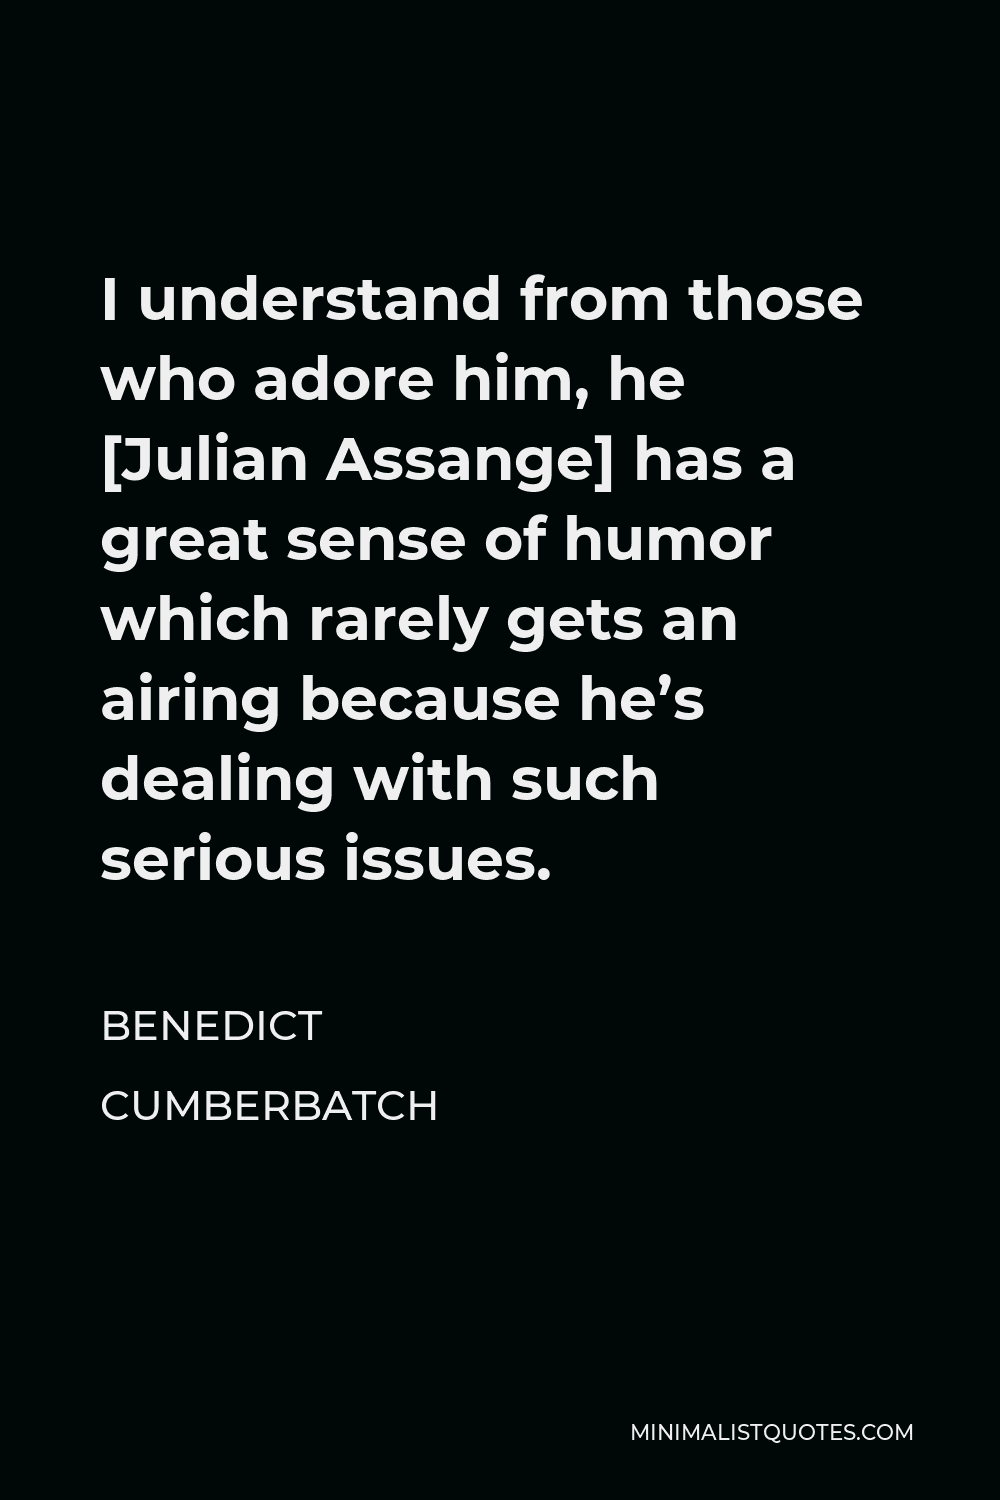 Benedict Cumberbatch Quote - I understand from those who adore him, he [Julian Assange] has a great sense of humor which rarely gets an airing because he’s dealing with such serious issues.